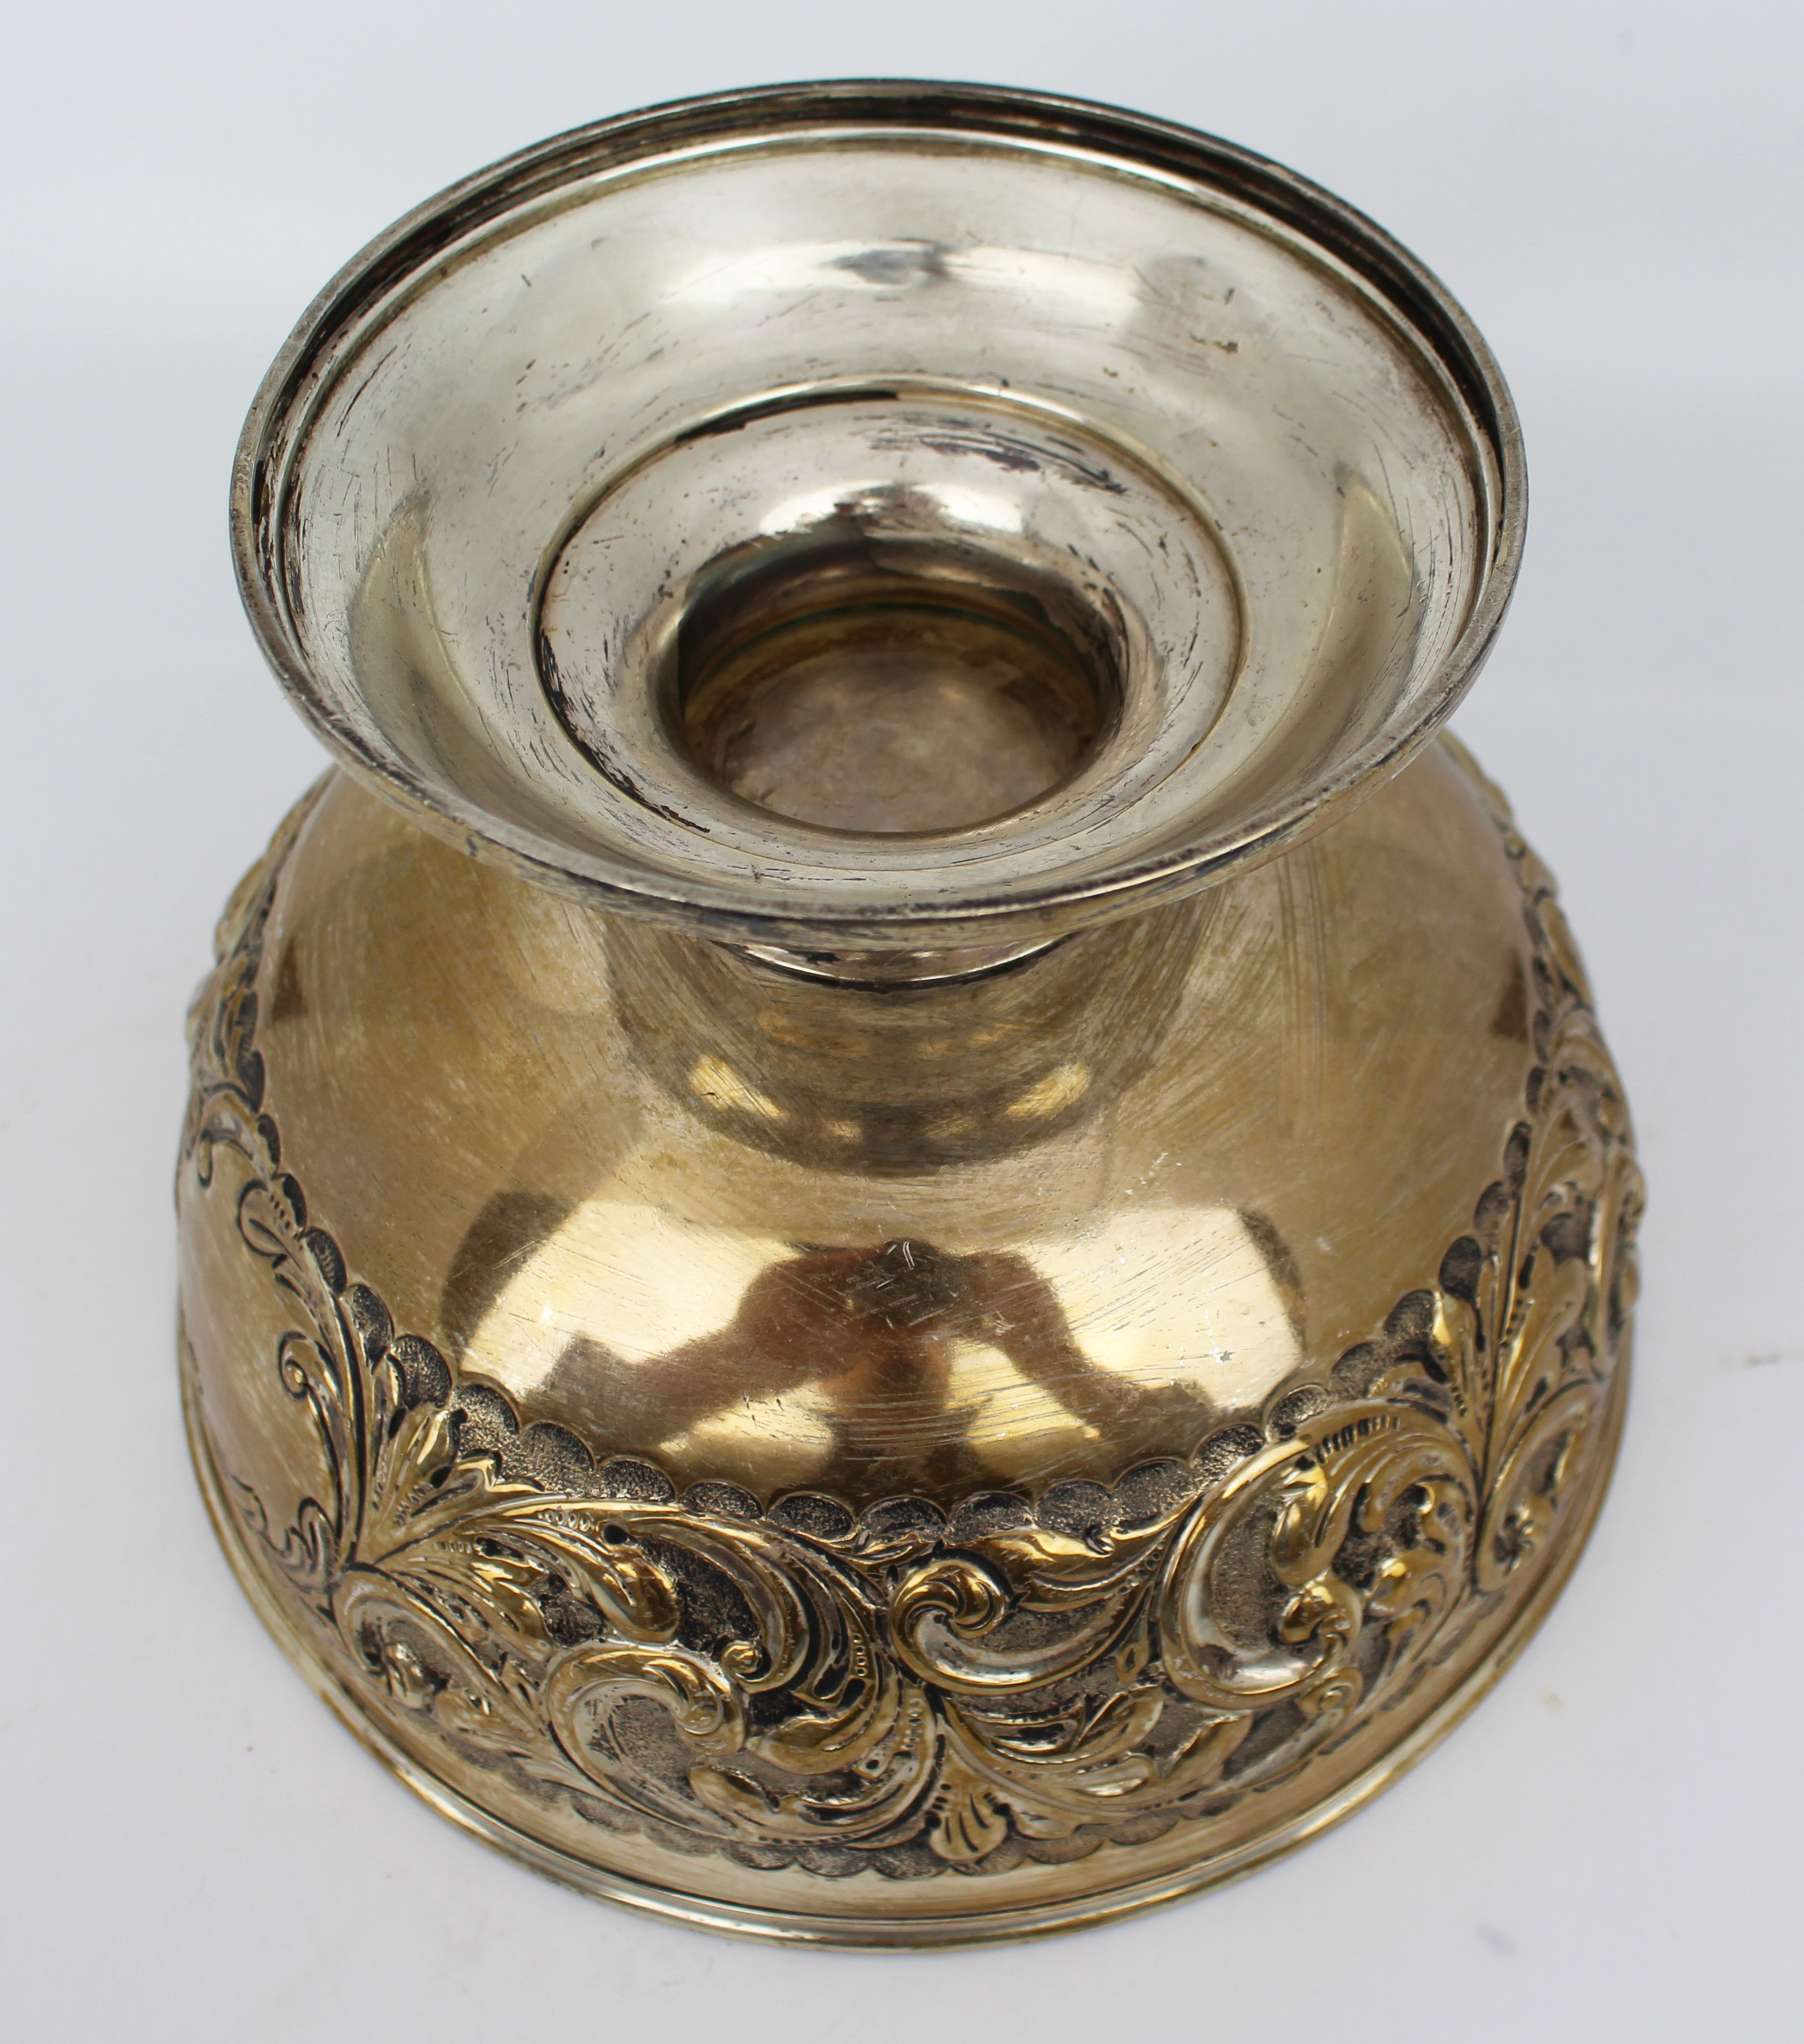 Edwardian Solid Silver Bowl London 1901 - Image 5 of 5